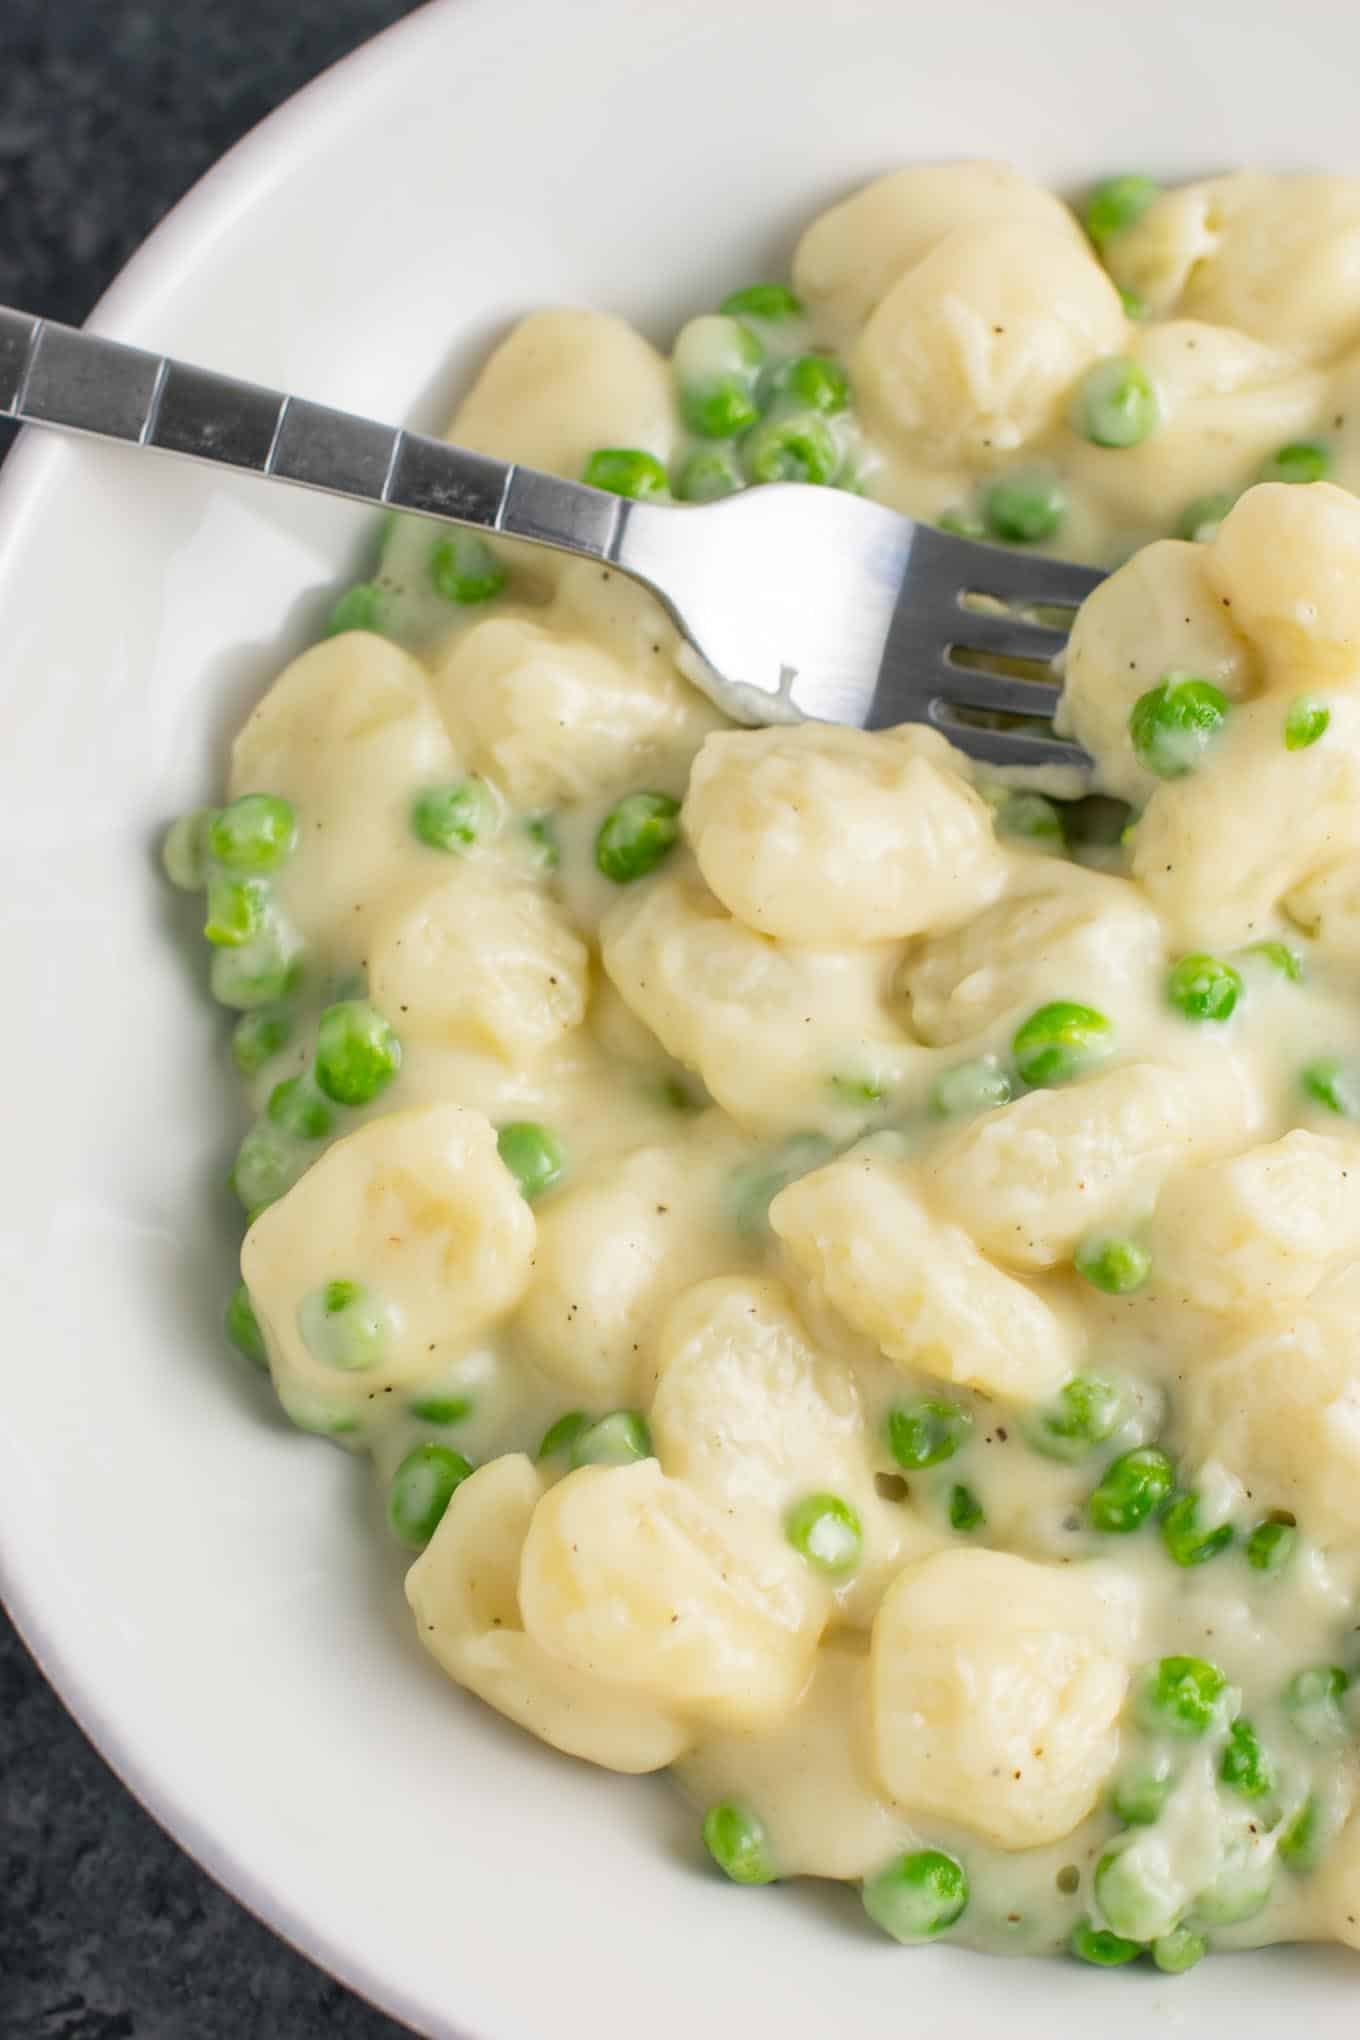 Ultra creamy gnocchi macaroni and cheese recipe with peas. A cheesy gnocchi comfort food recipe made in less than 15 minutes. 